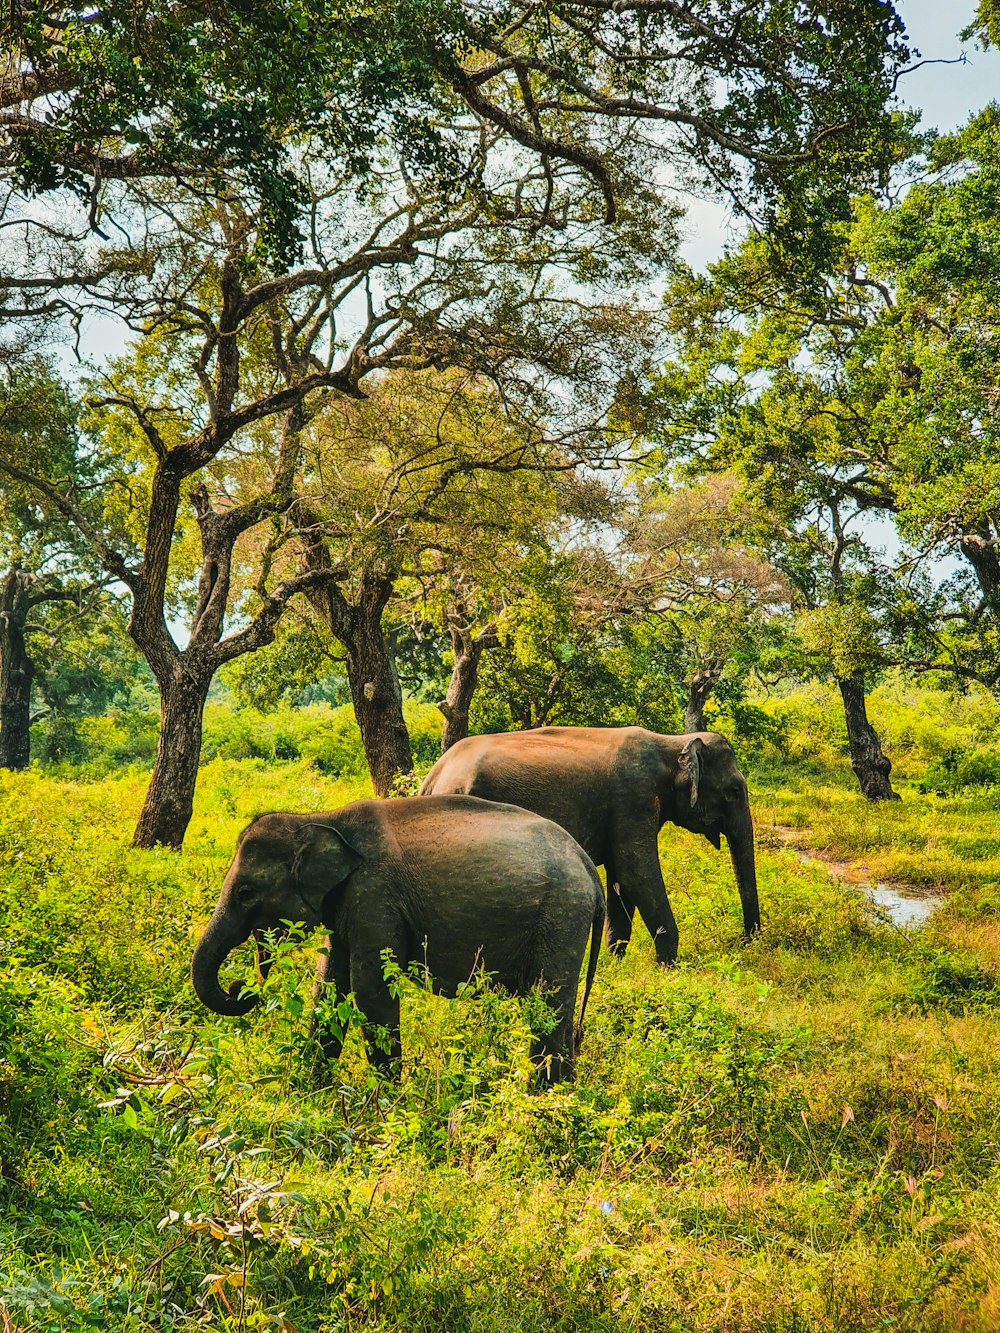 brown elephant and calf on green grass field during daytime